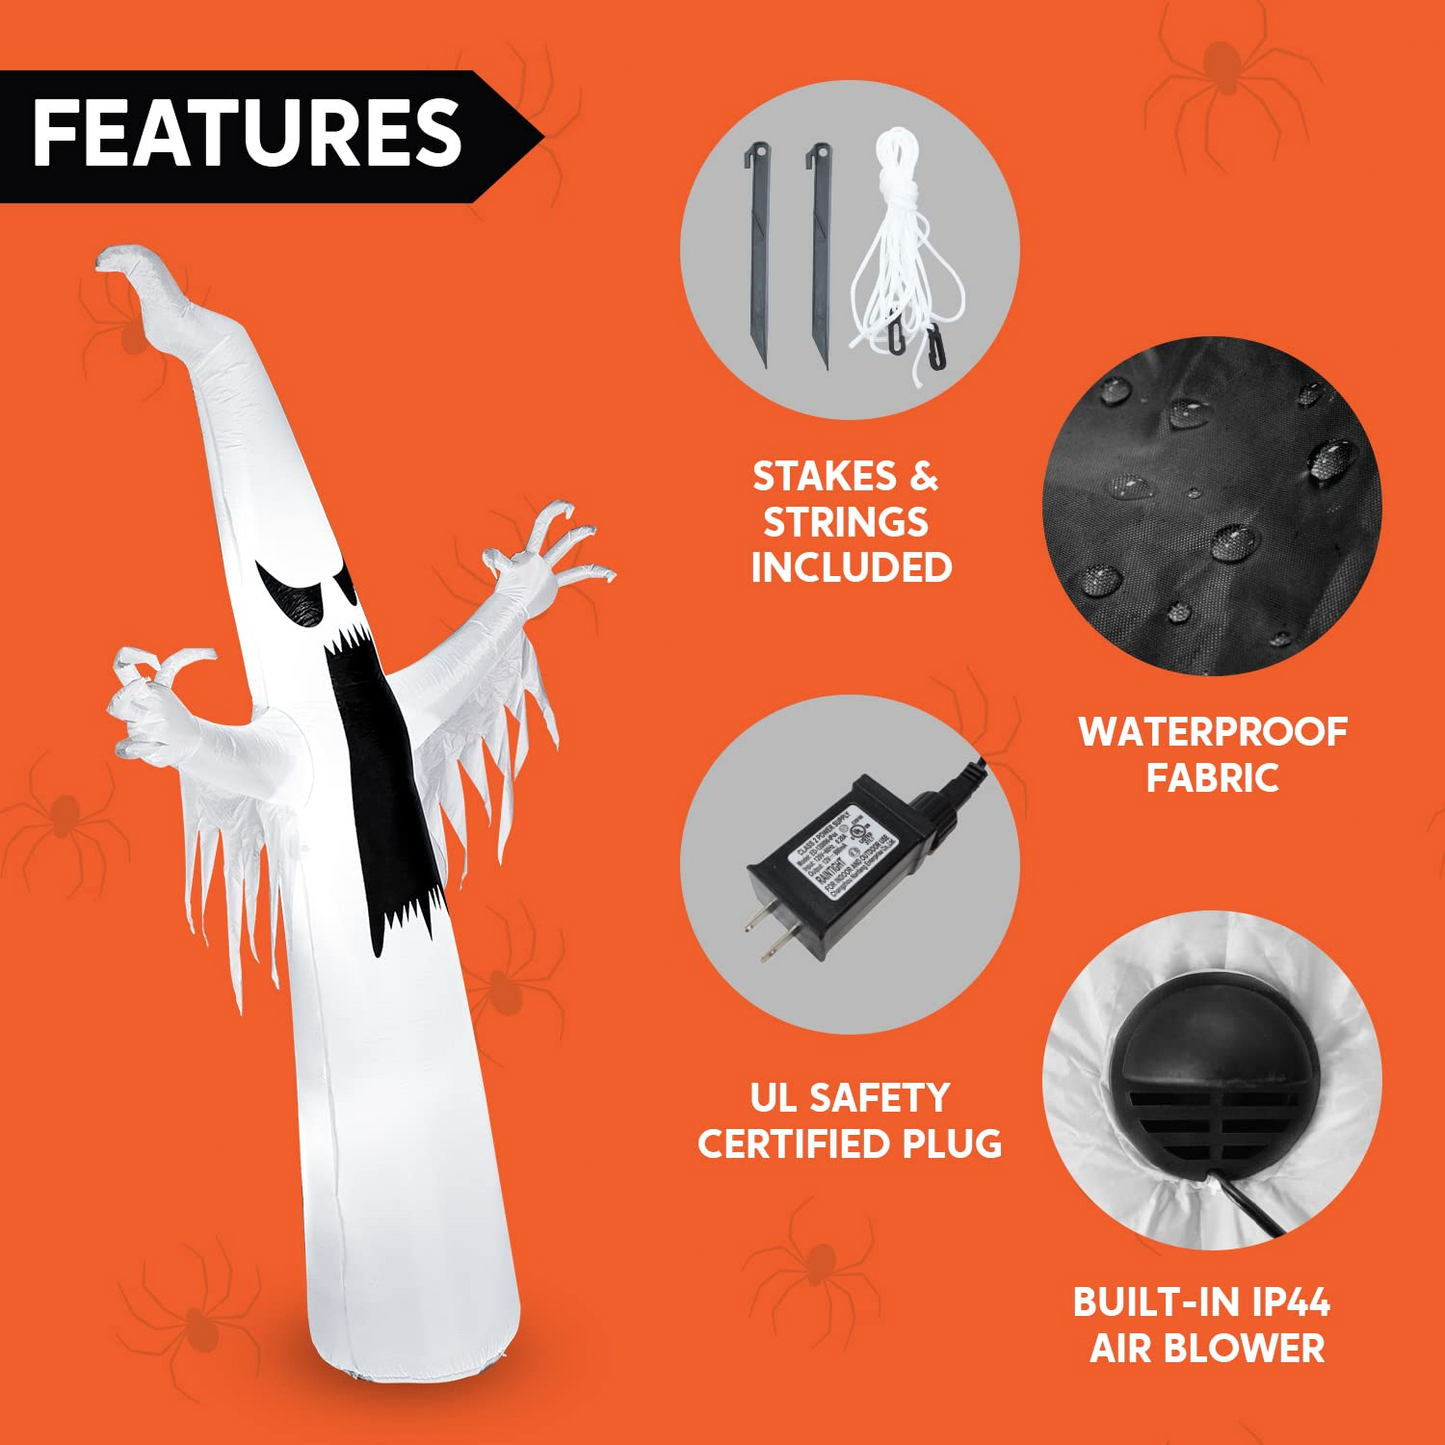 Halloween Giant Towering Spooky Ghost Inflatable (12 ft)